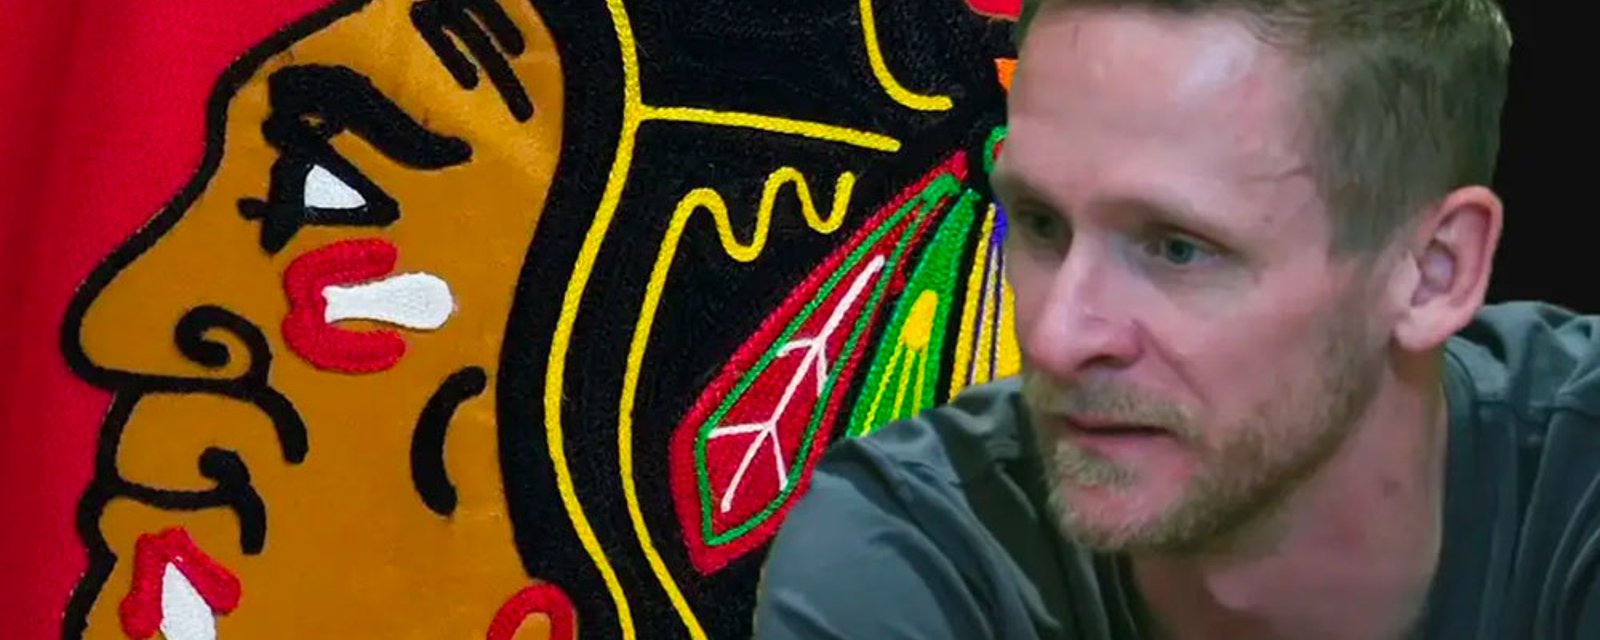 Blackhawks call out Corey Perry for “unacceptable and unprofessional” conduct, kick him off the team and terminate his contract